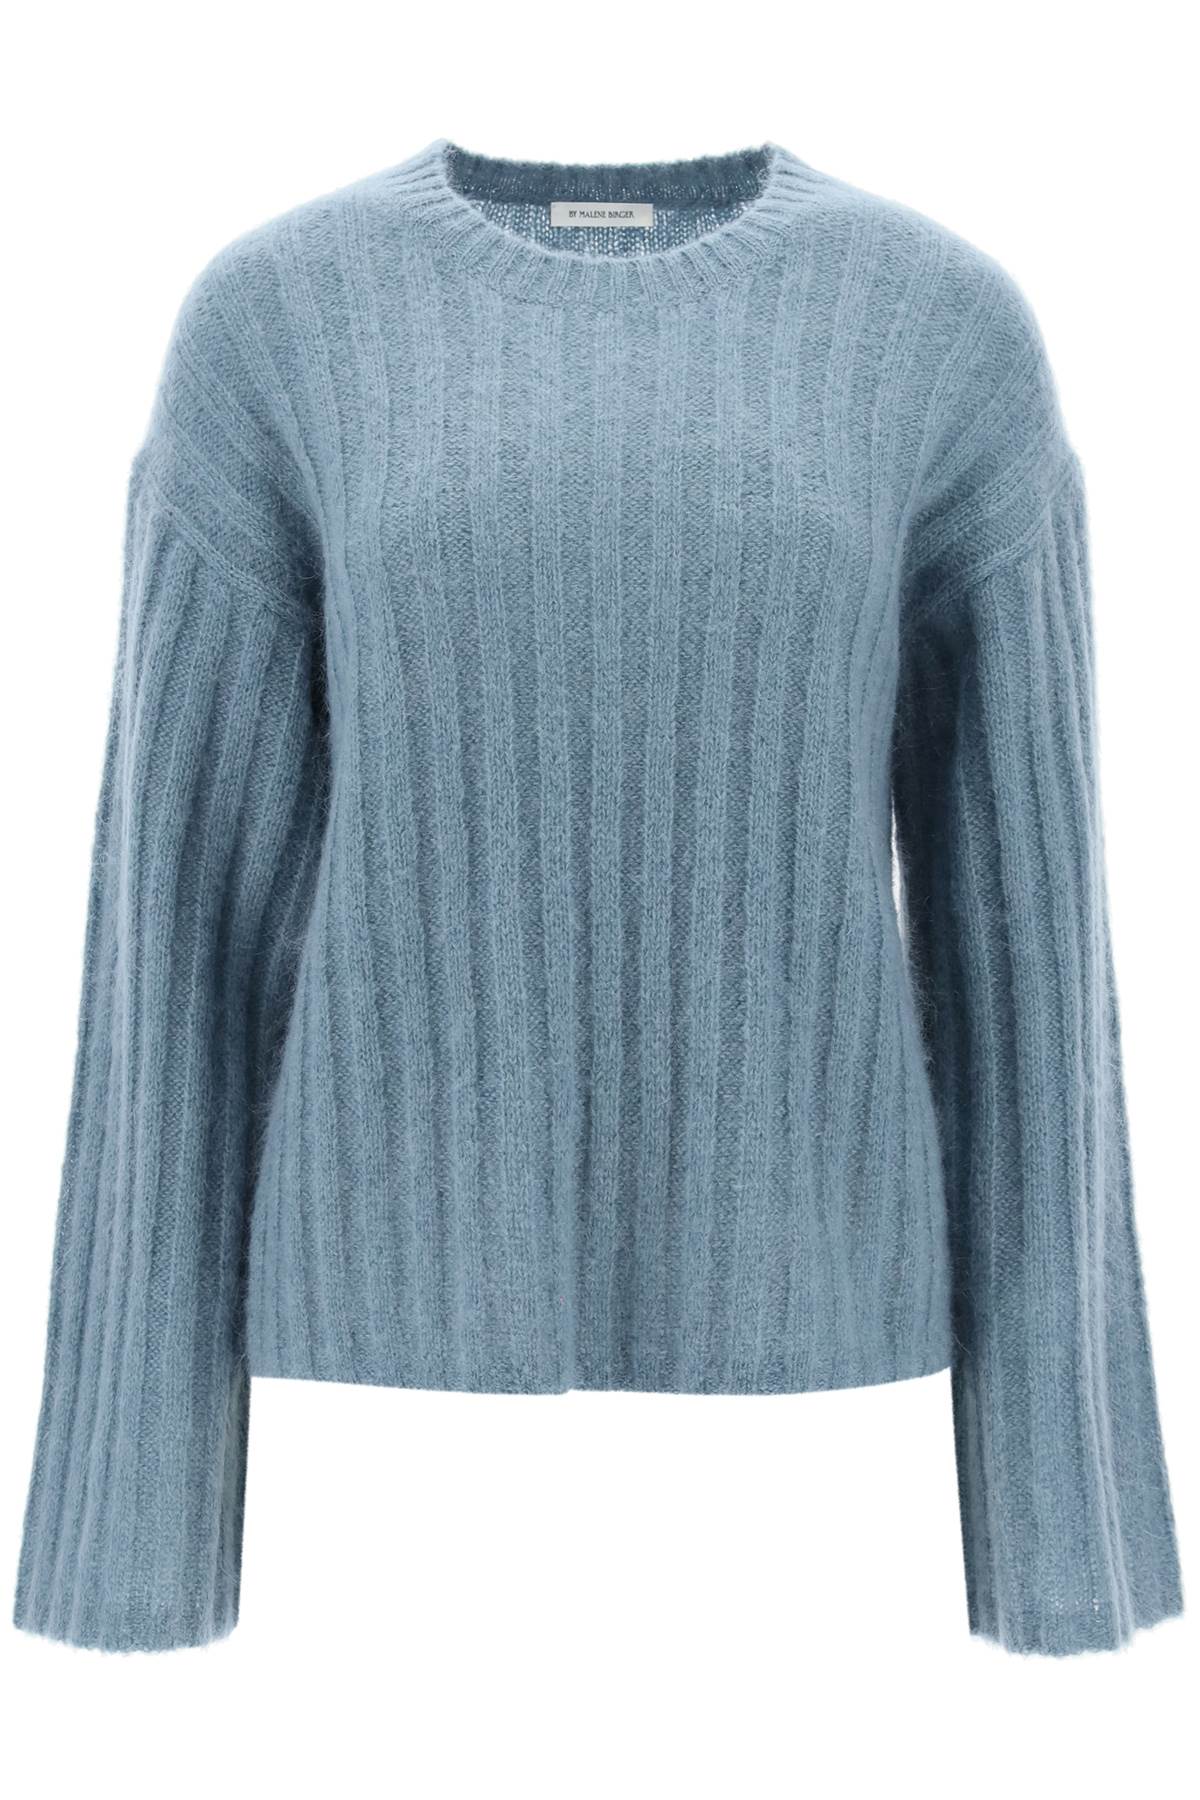 By Malene Birger BY MALENE BIRGER ribbed knit pullover sweater